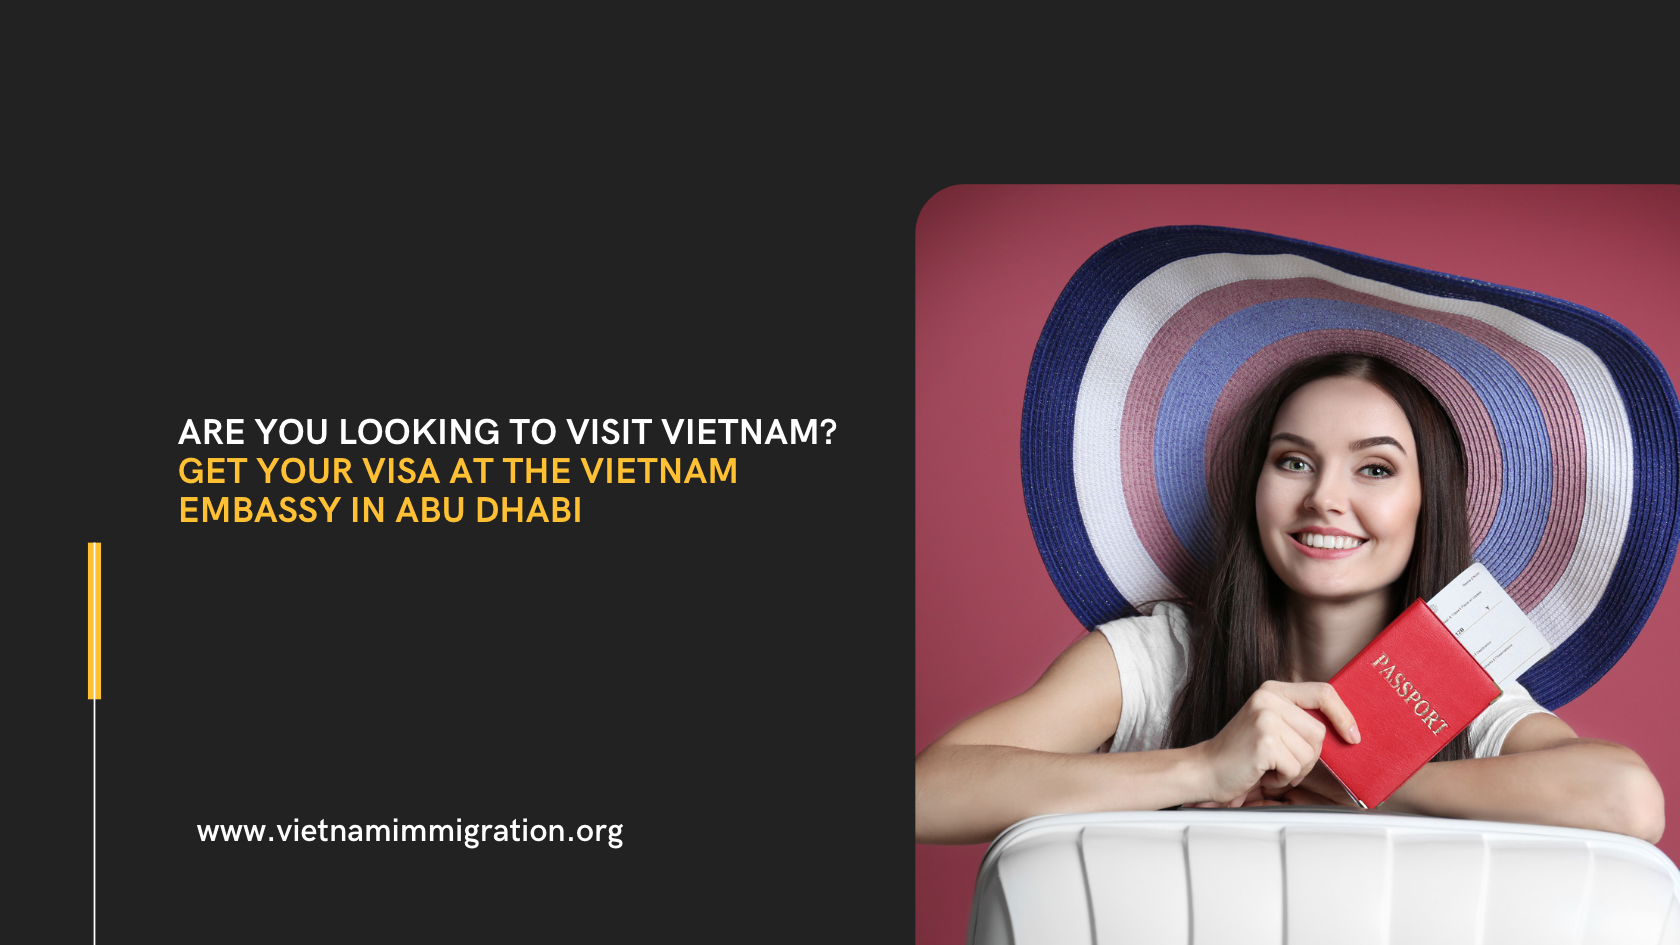 Are You Looking to Visit Vietnam? Get Your Visa at the Vietnam Embassy in Abu Dhabi